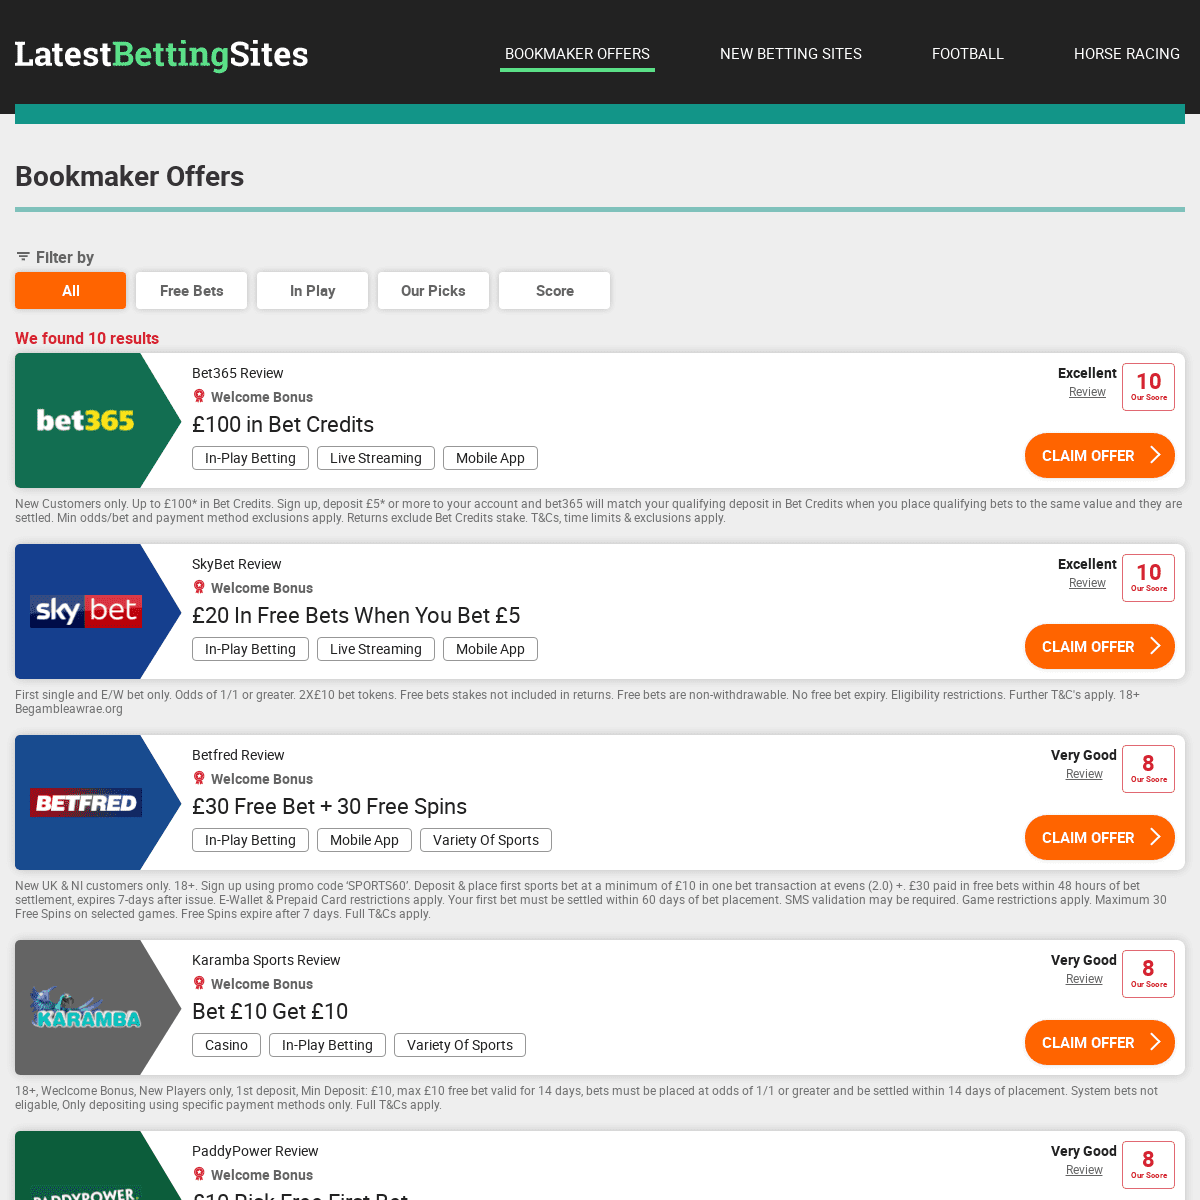 A complete backup of https://latestbettingsites.co.uk